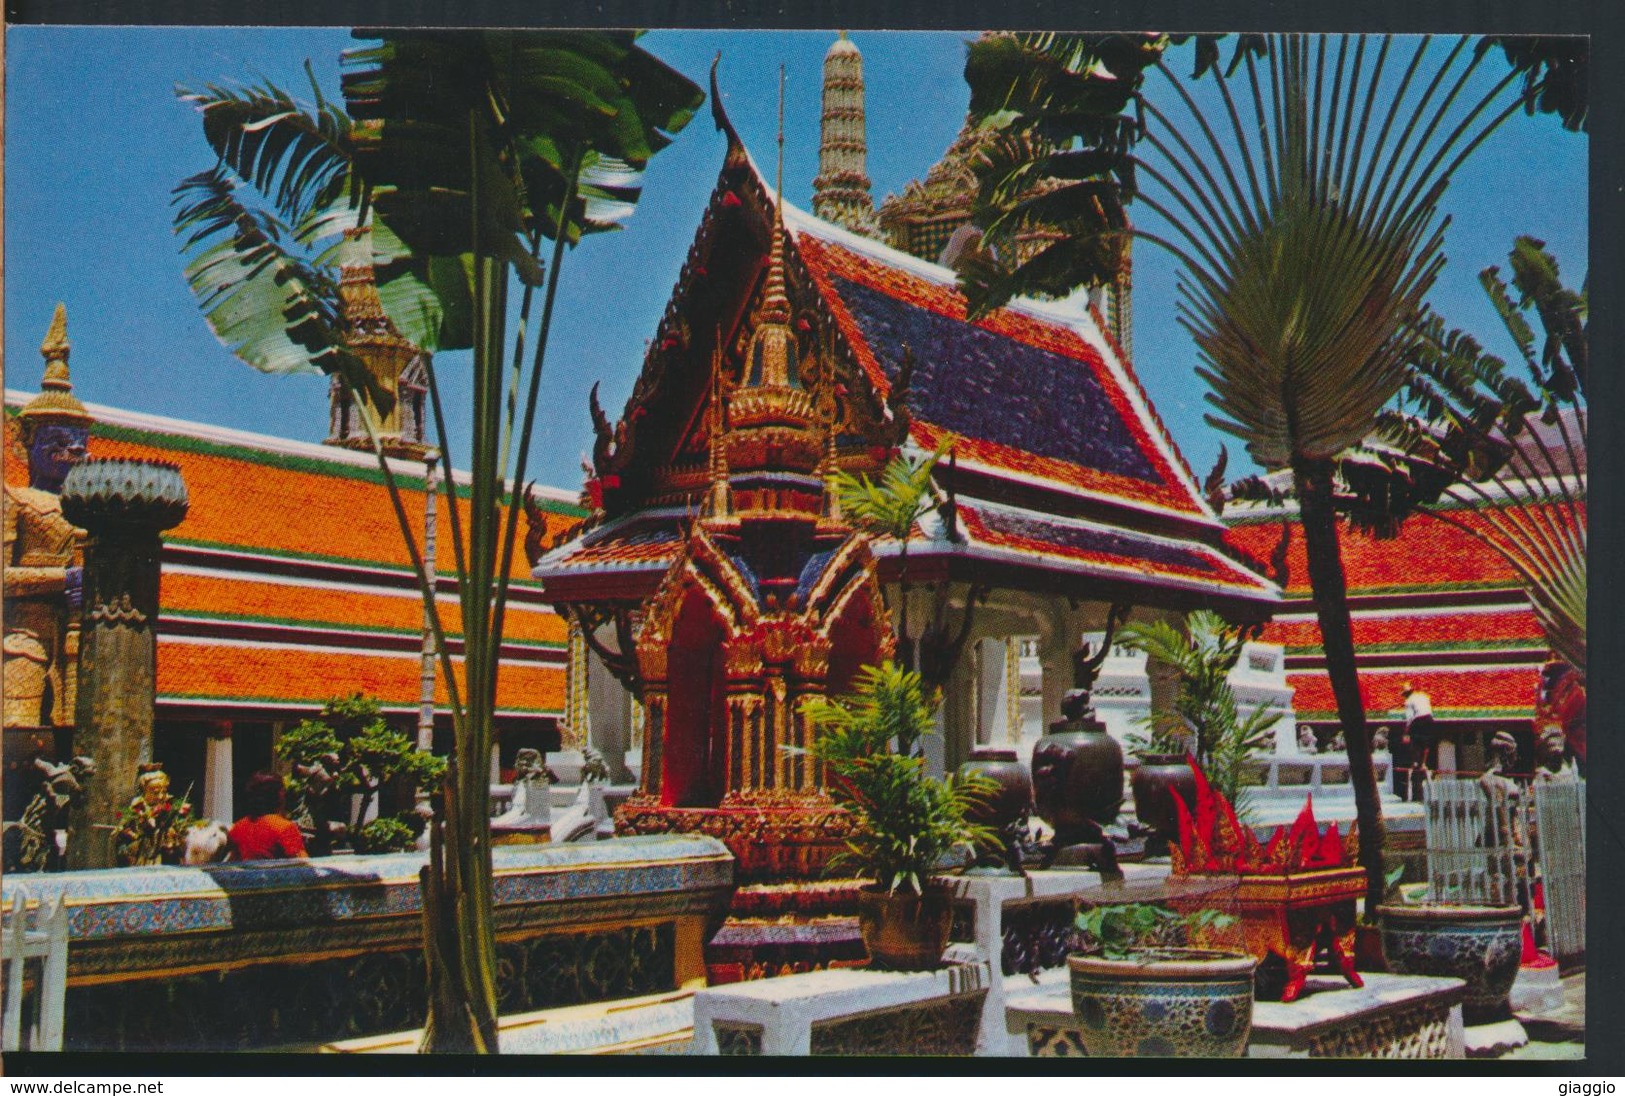 °°° 13285 - THAILAND - WAT PHRA KEO (EMERALD BUDDHA TEMPLE) - 1973 With Stamps °°° - Tailandia